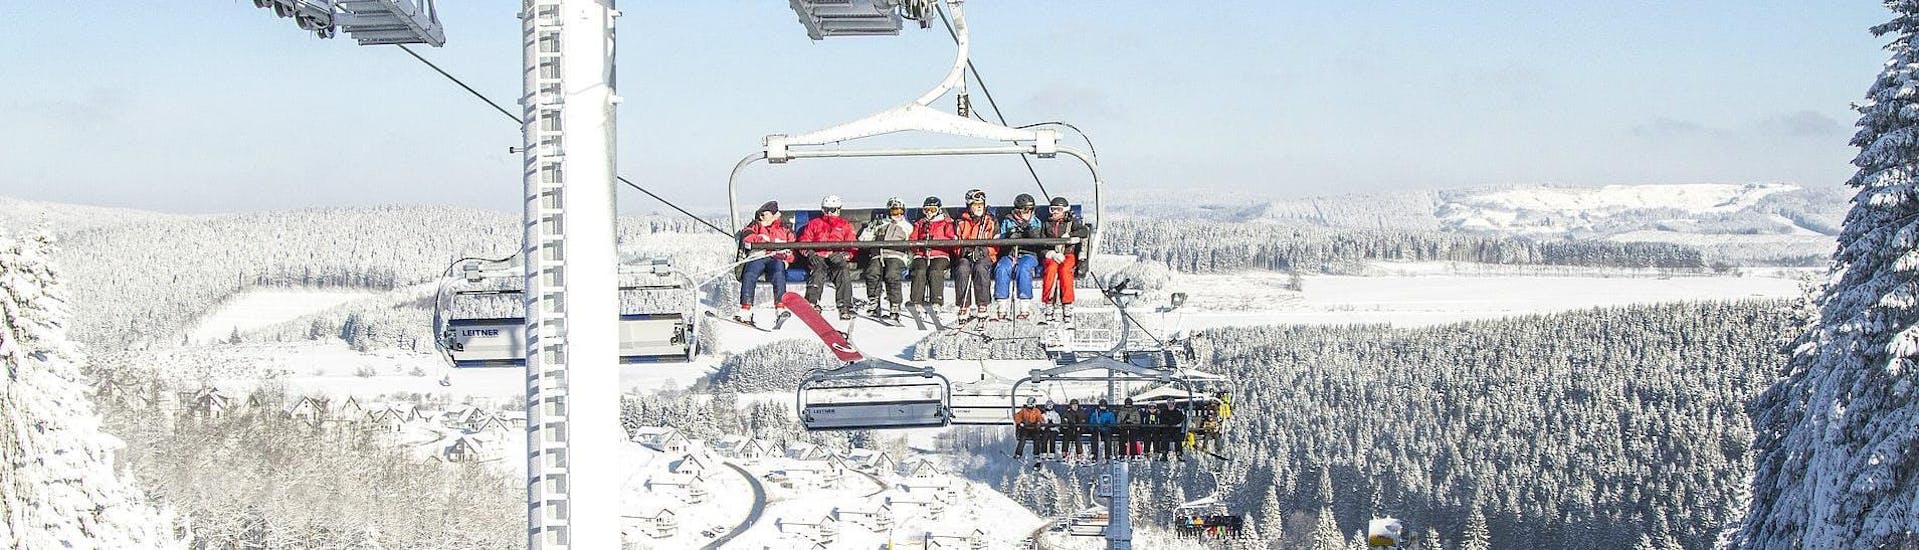 A group of skiers taking a chair lift to the top of a mountain to start one of their ski lessons with Skischule Kahler Asten in the ski resort of Winterberg.